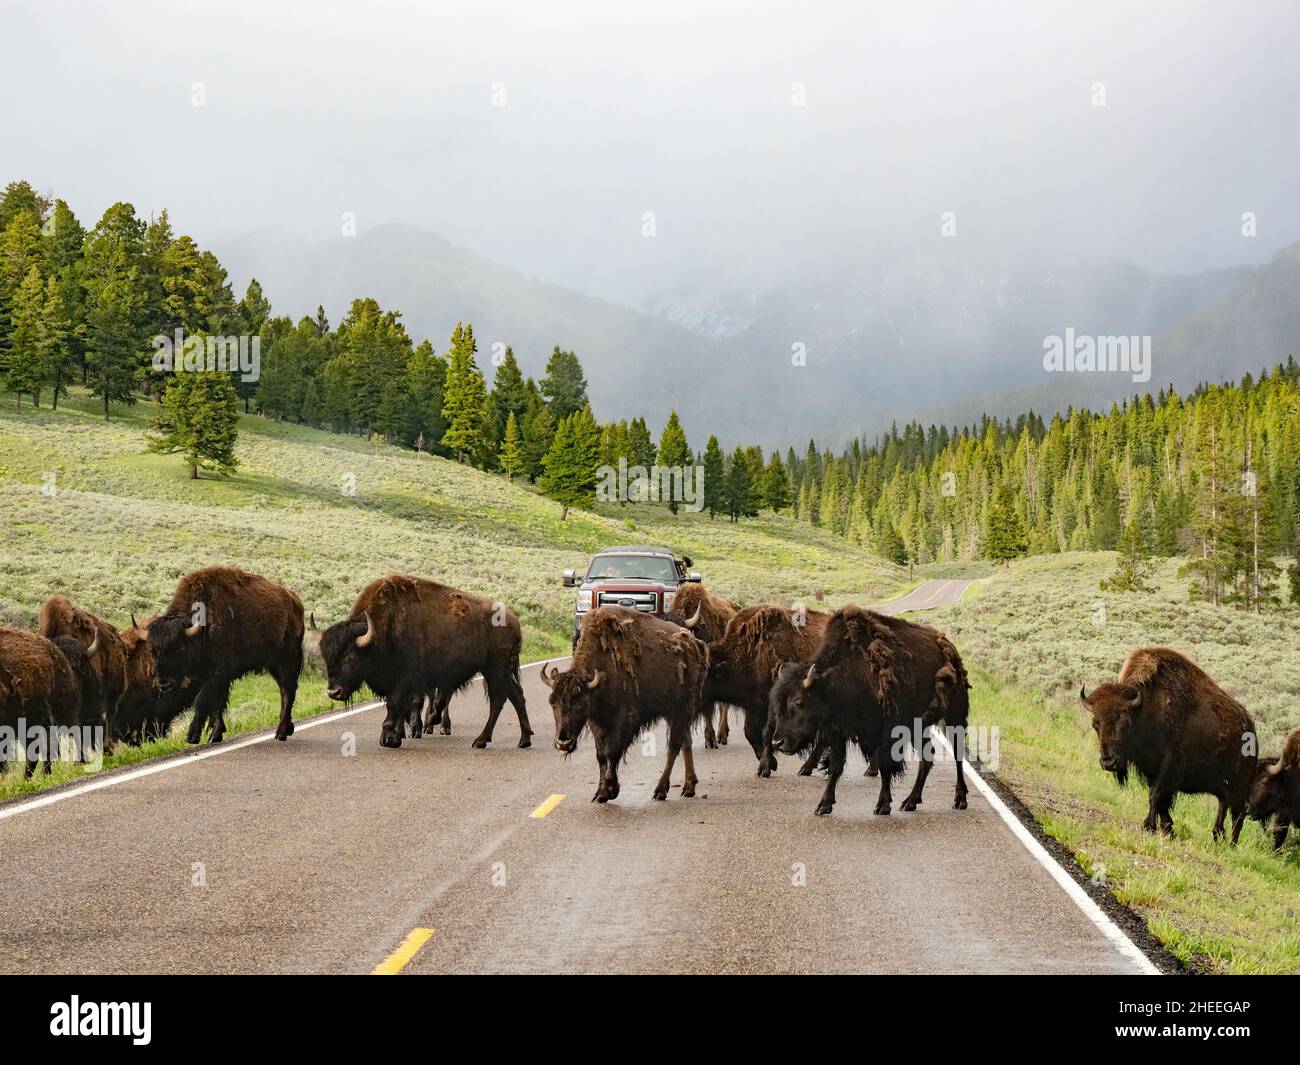 Adult bison, Bison bison, crossing the highway in Yellowstone National Park, Wyoming. Stock Photo